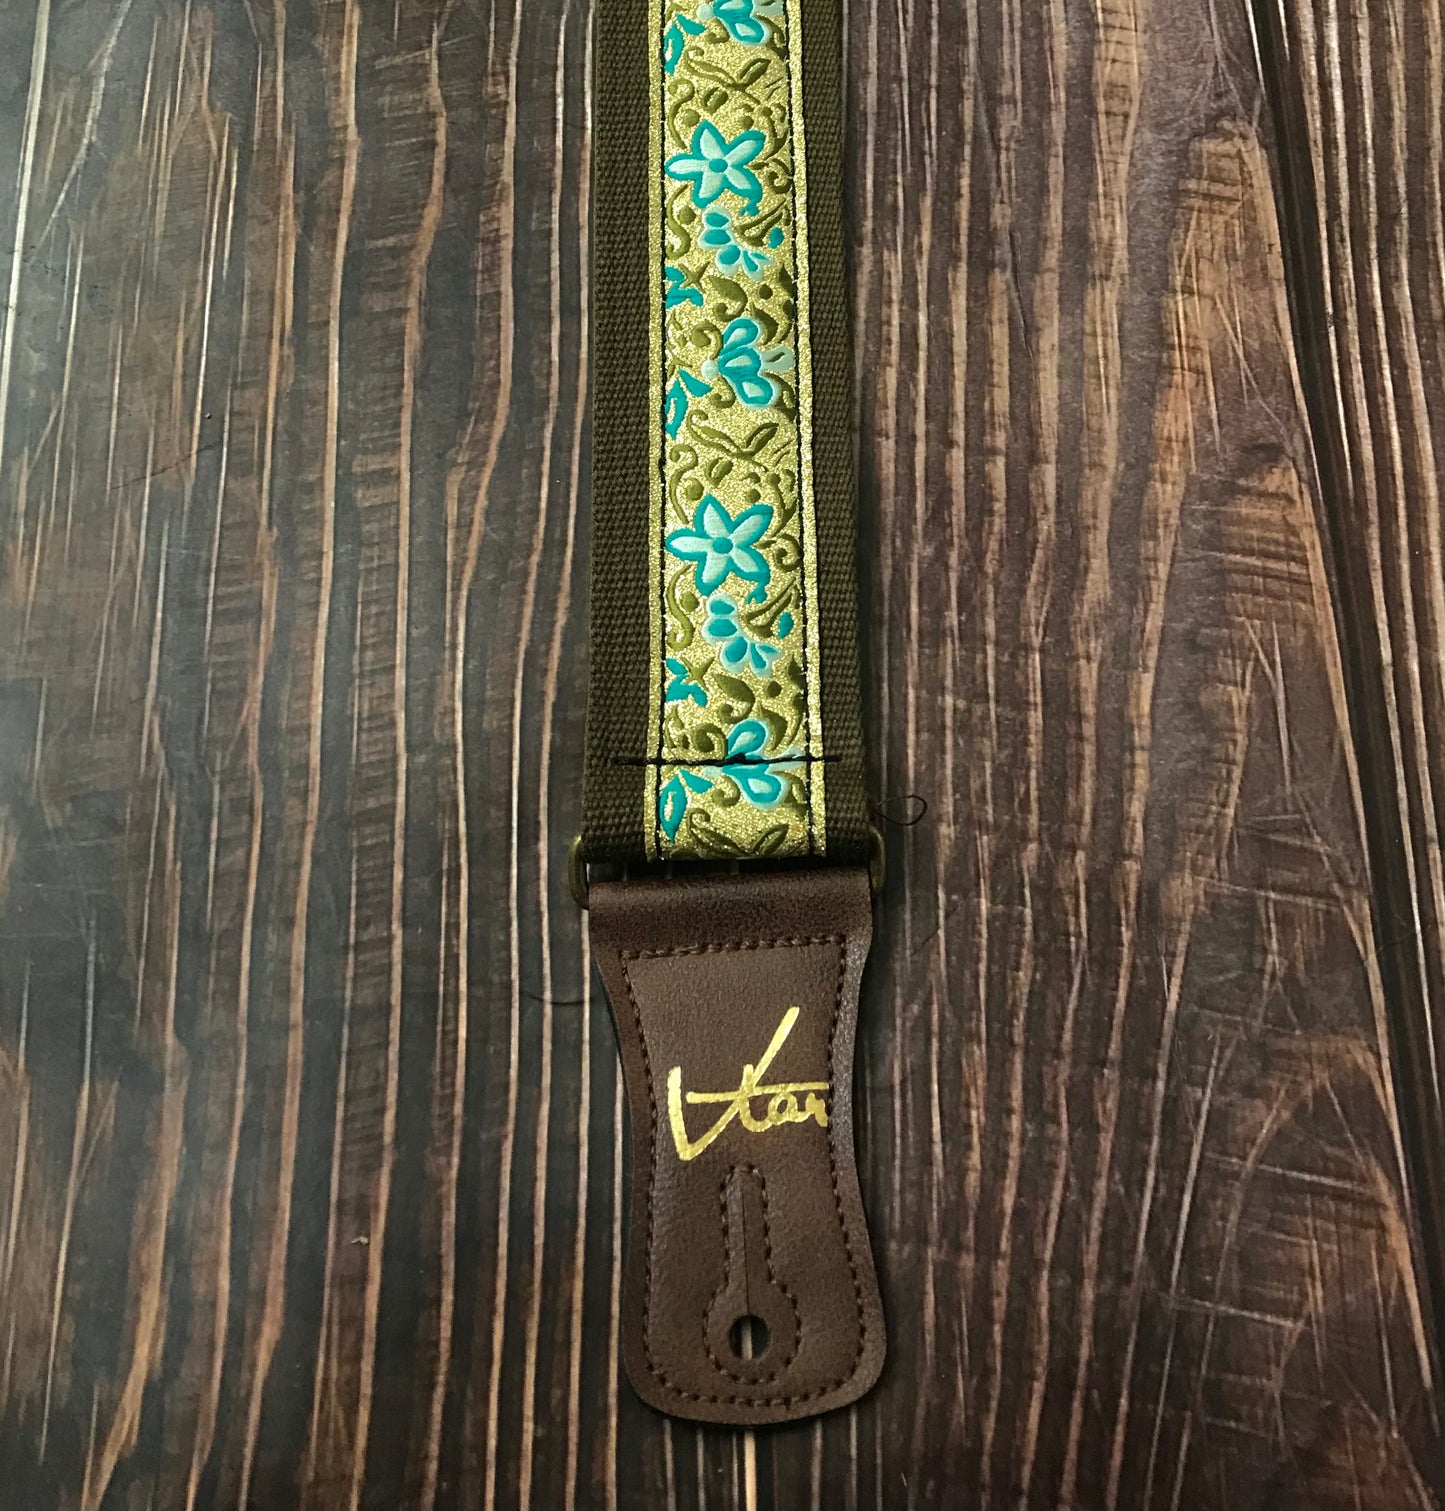 The Green Lady Strap